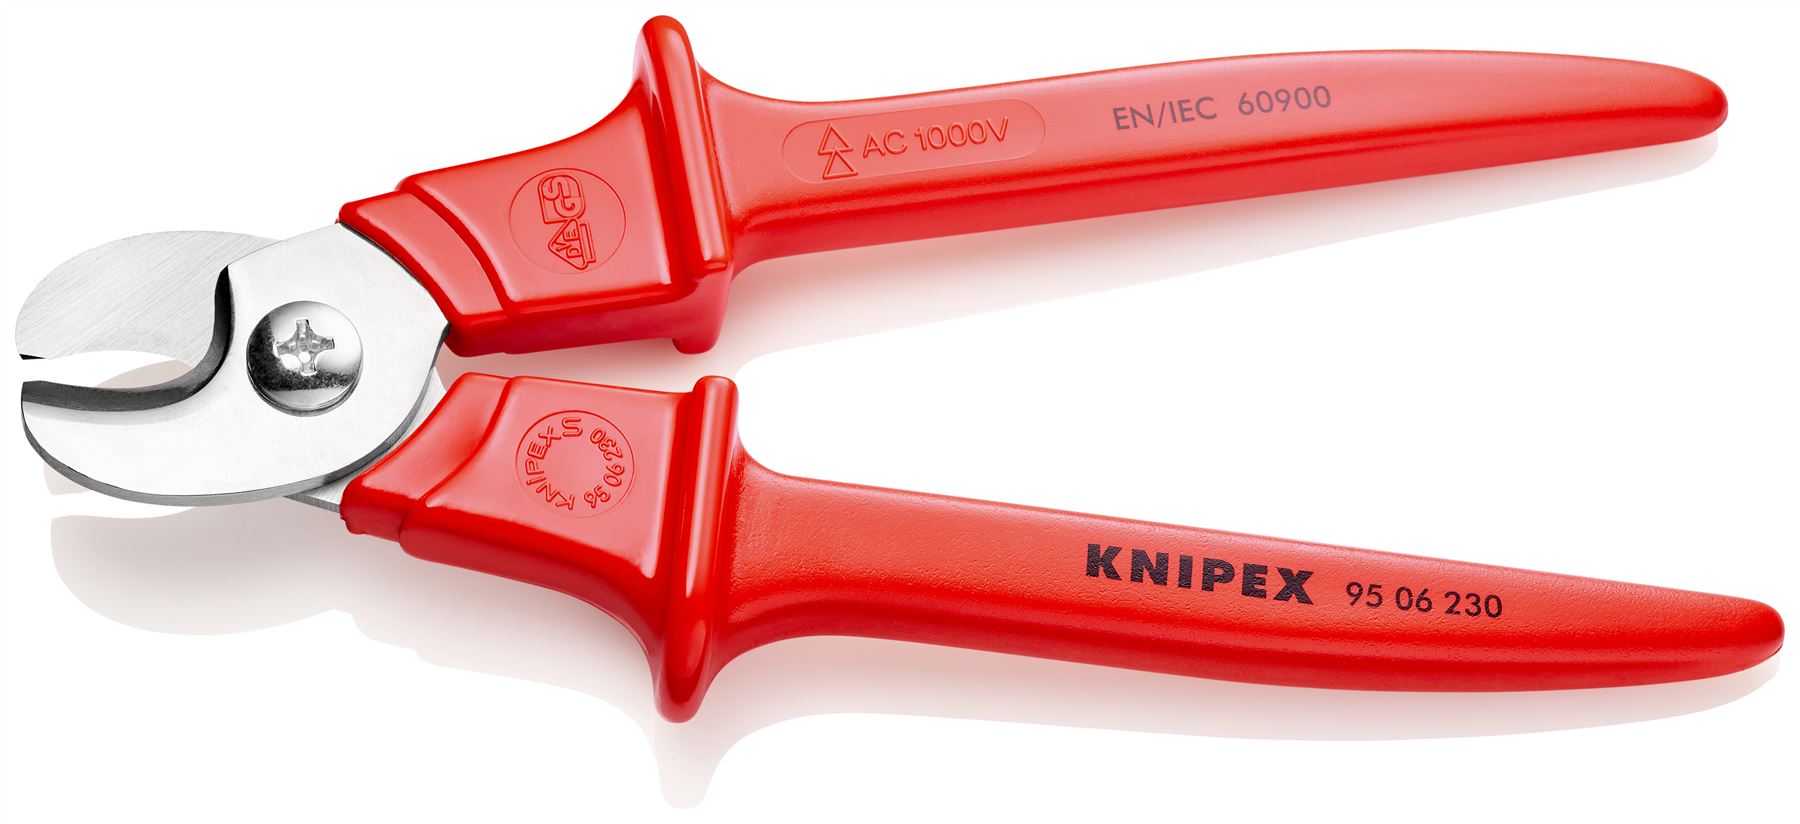 KNIPEX Cable Shears Cutters VDE Insulated Cuts Cable up to 16mm Diameter 230mm Plastic Insulated Handles 95 06 230 SB